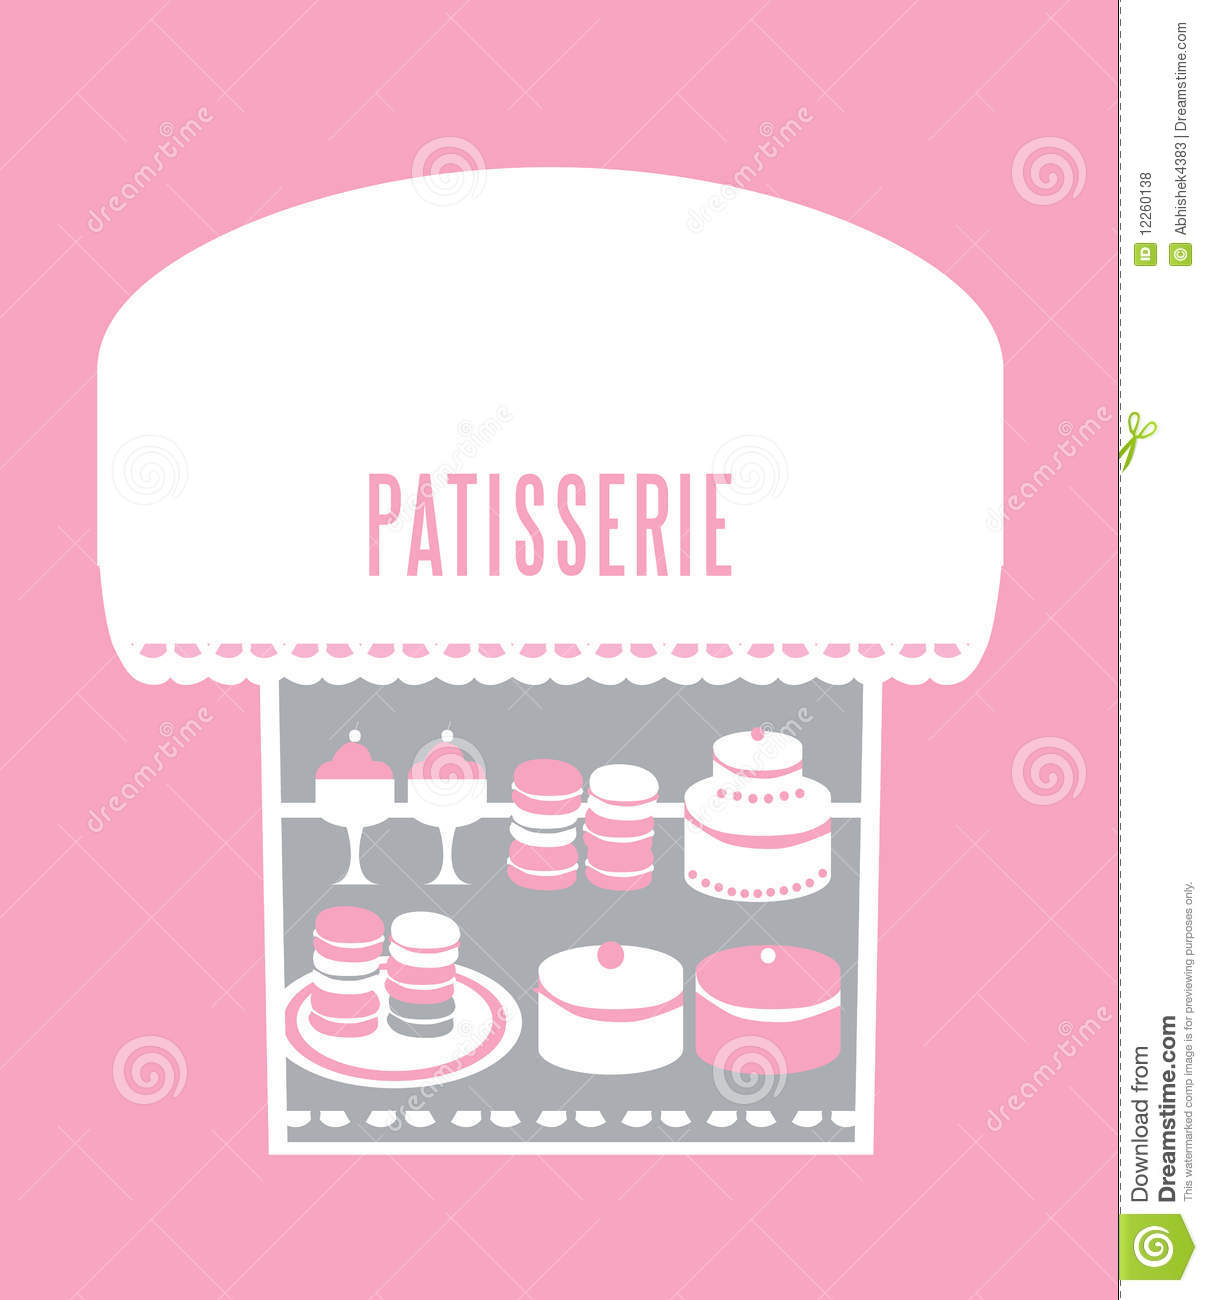 Pastry Shop Royalty Free Stock Photos   Image  12260138